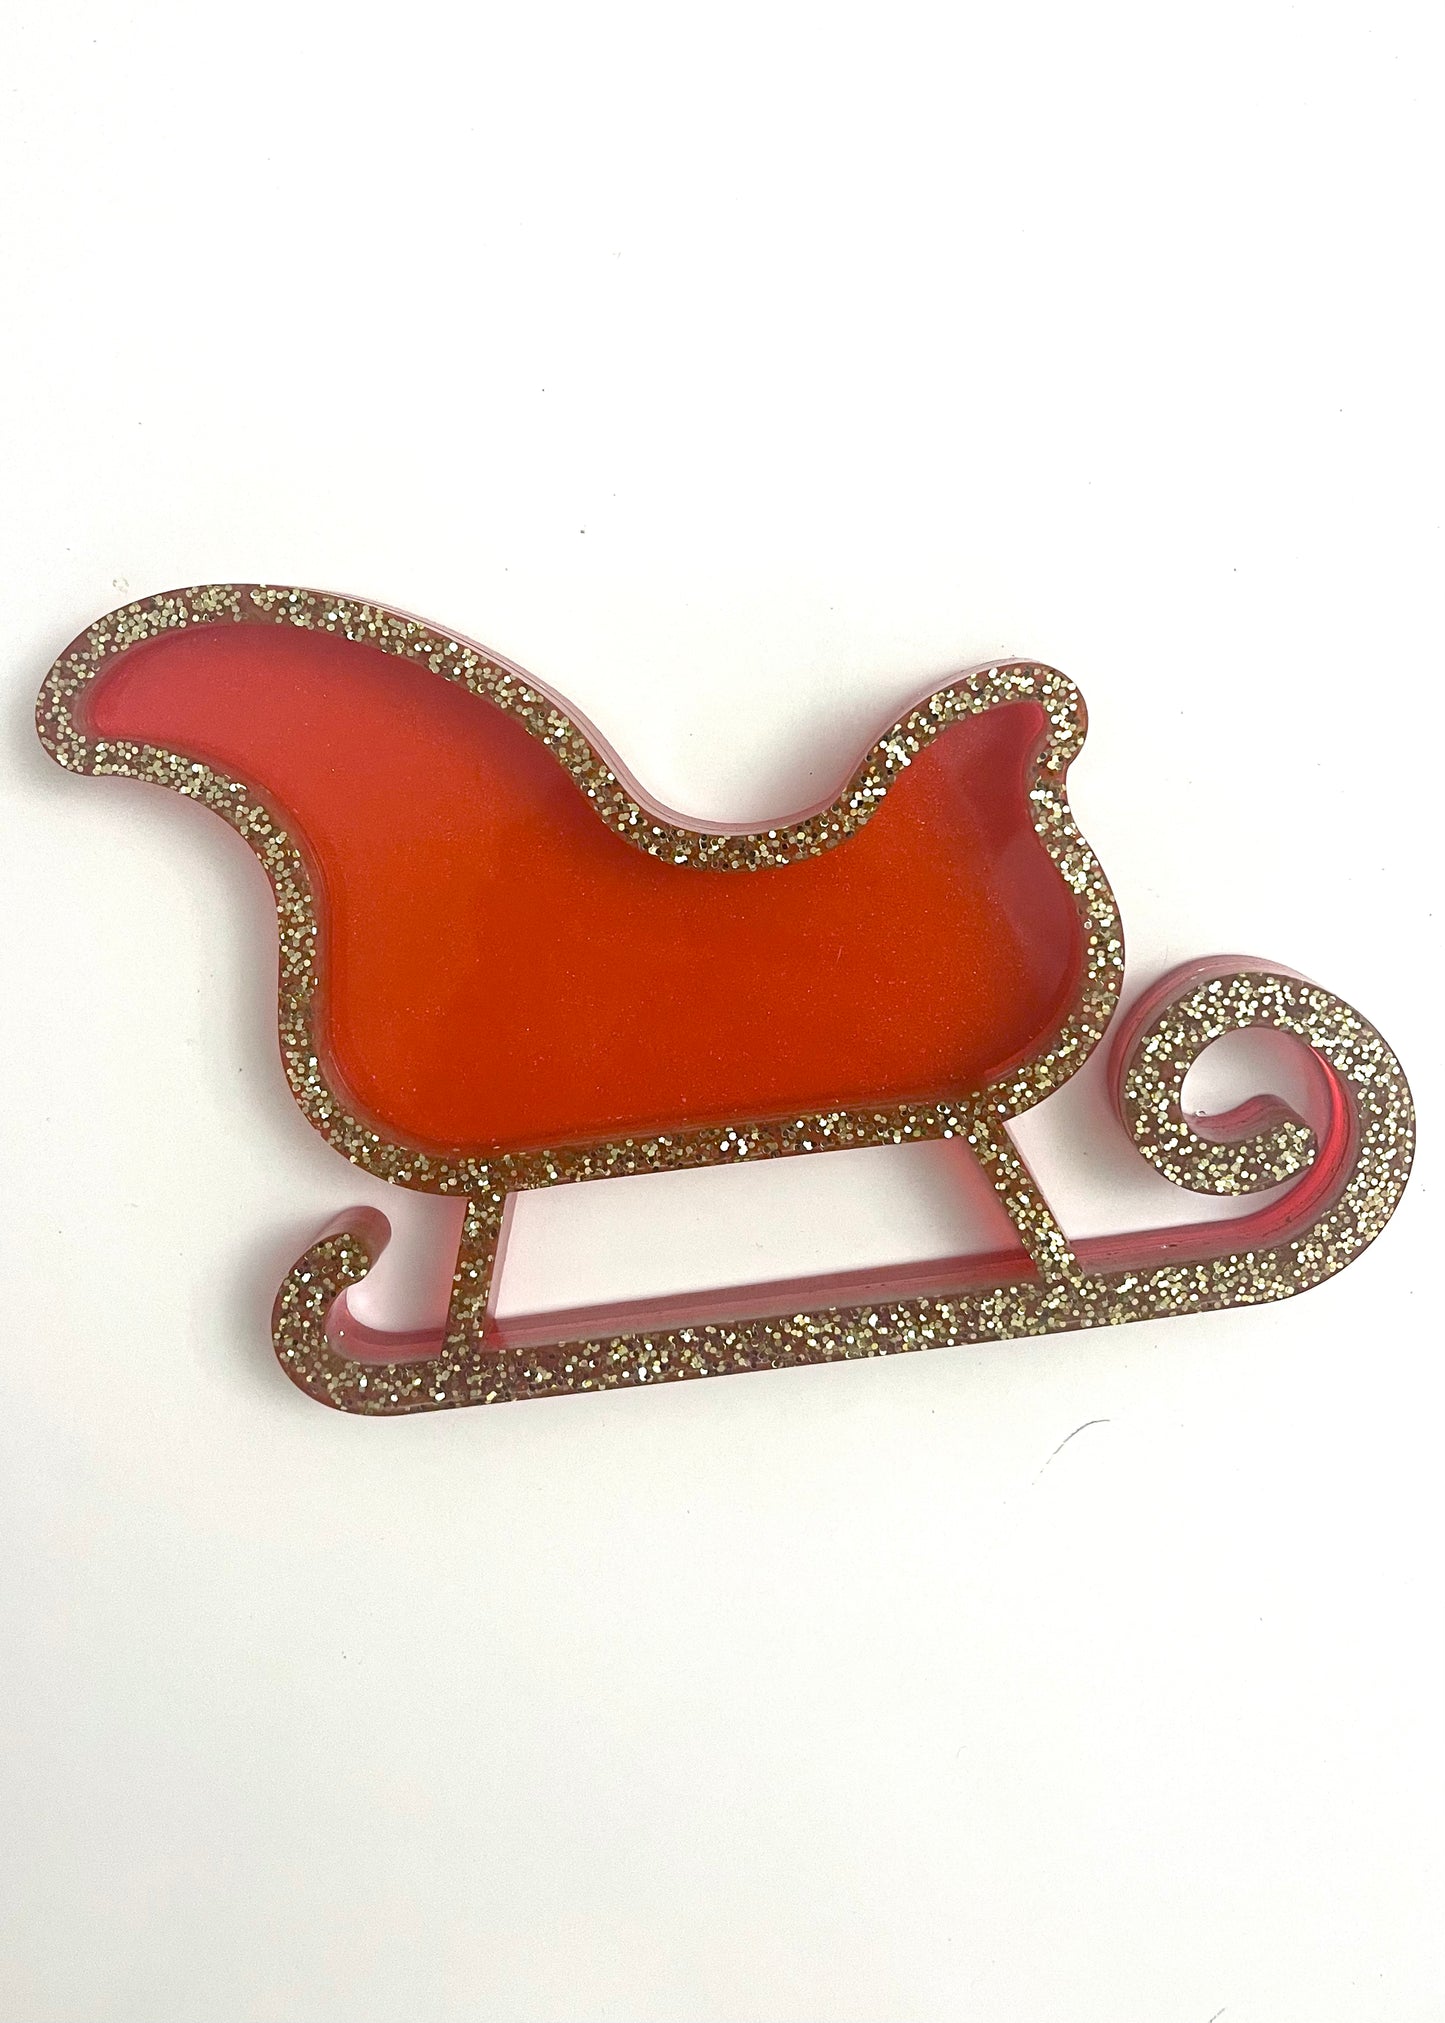 Sleigh Tray and Presents